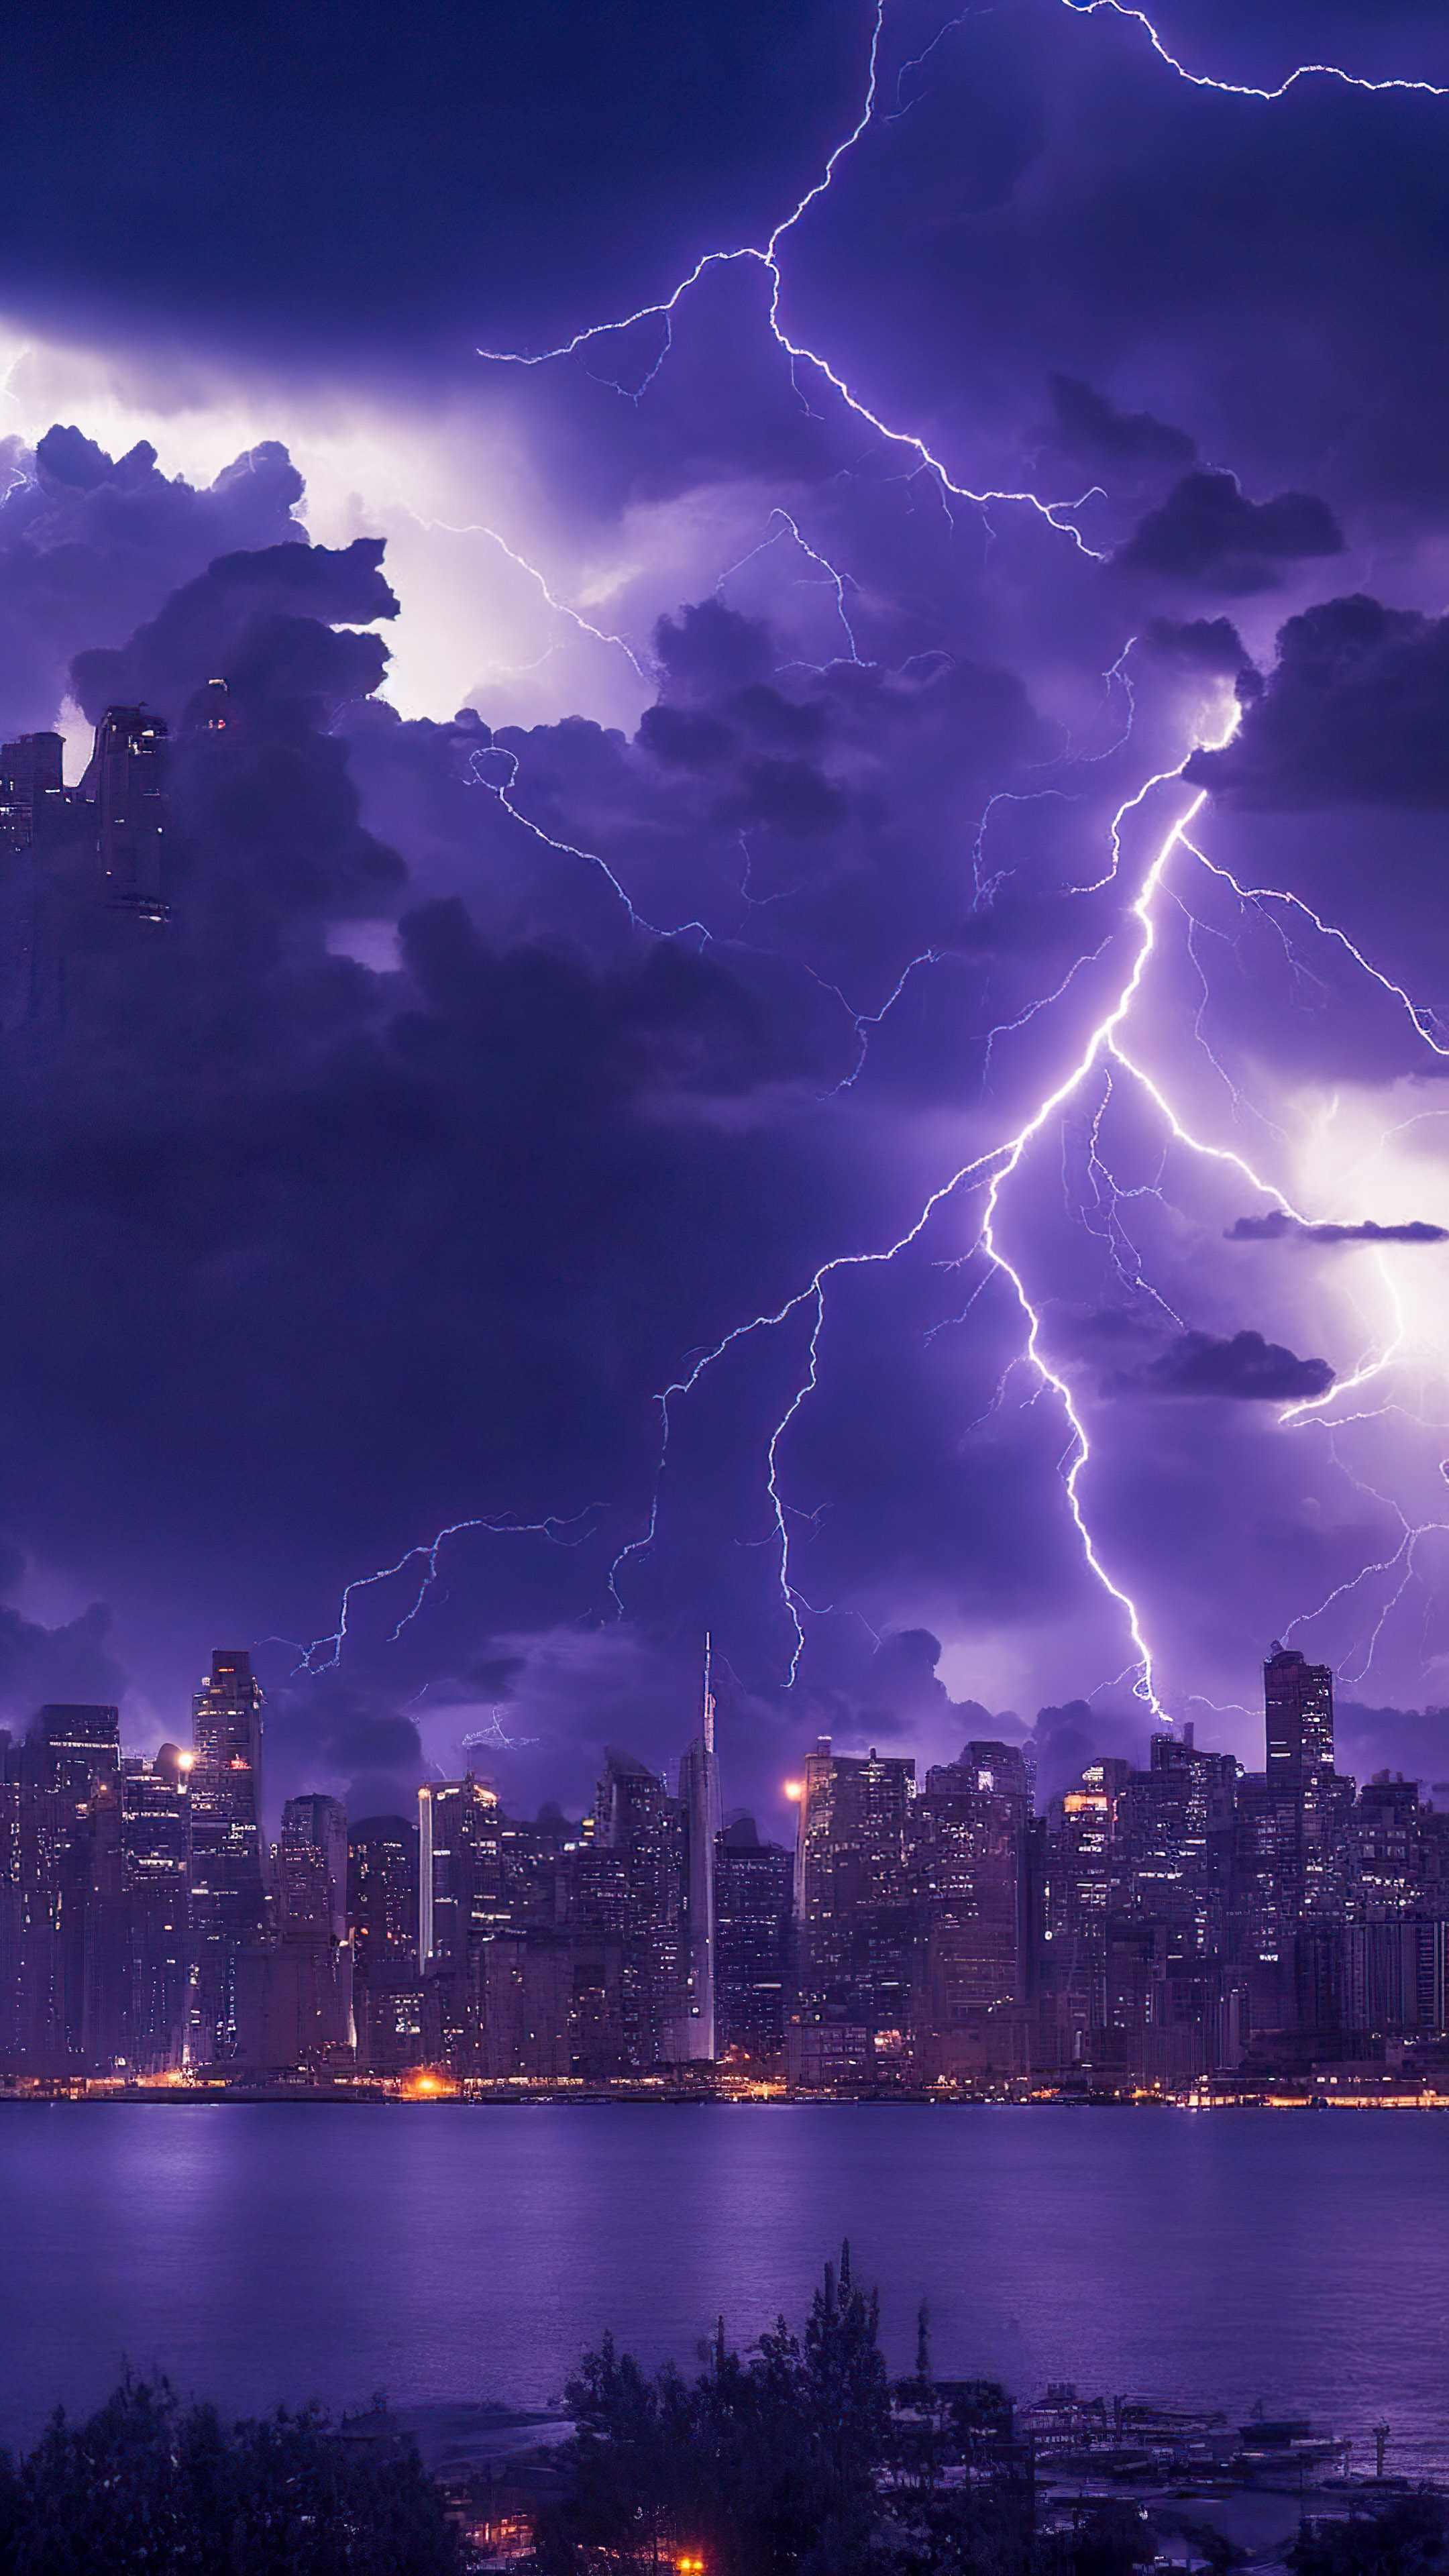 Capture the intensity of nature's drama with our night sky wallpaper, showcasing a thunderstorm over a city skyline, complete with electrifying lightning bolts.